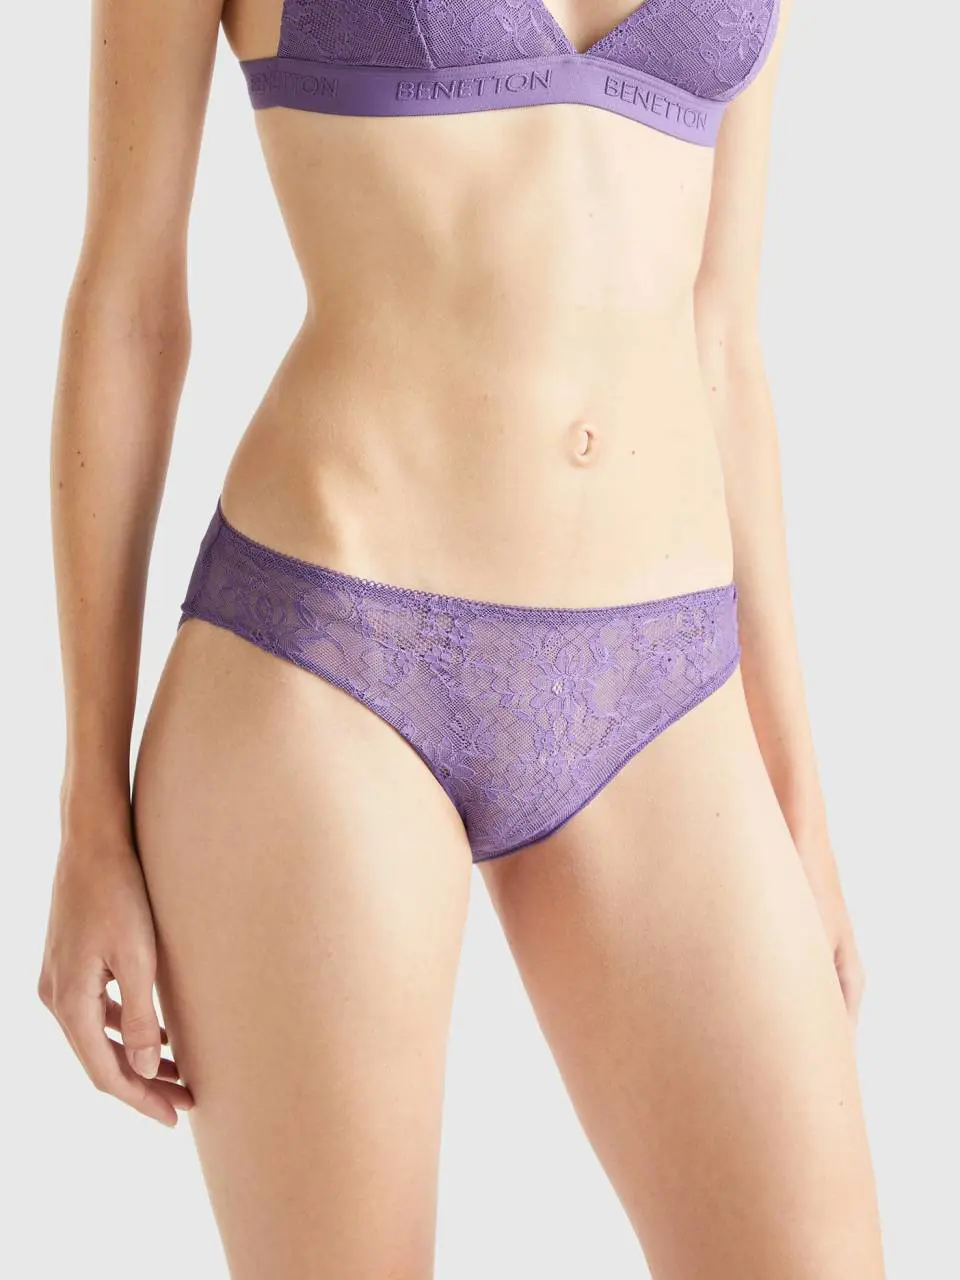 Benetton underwear in lace and microfiber. 1